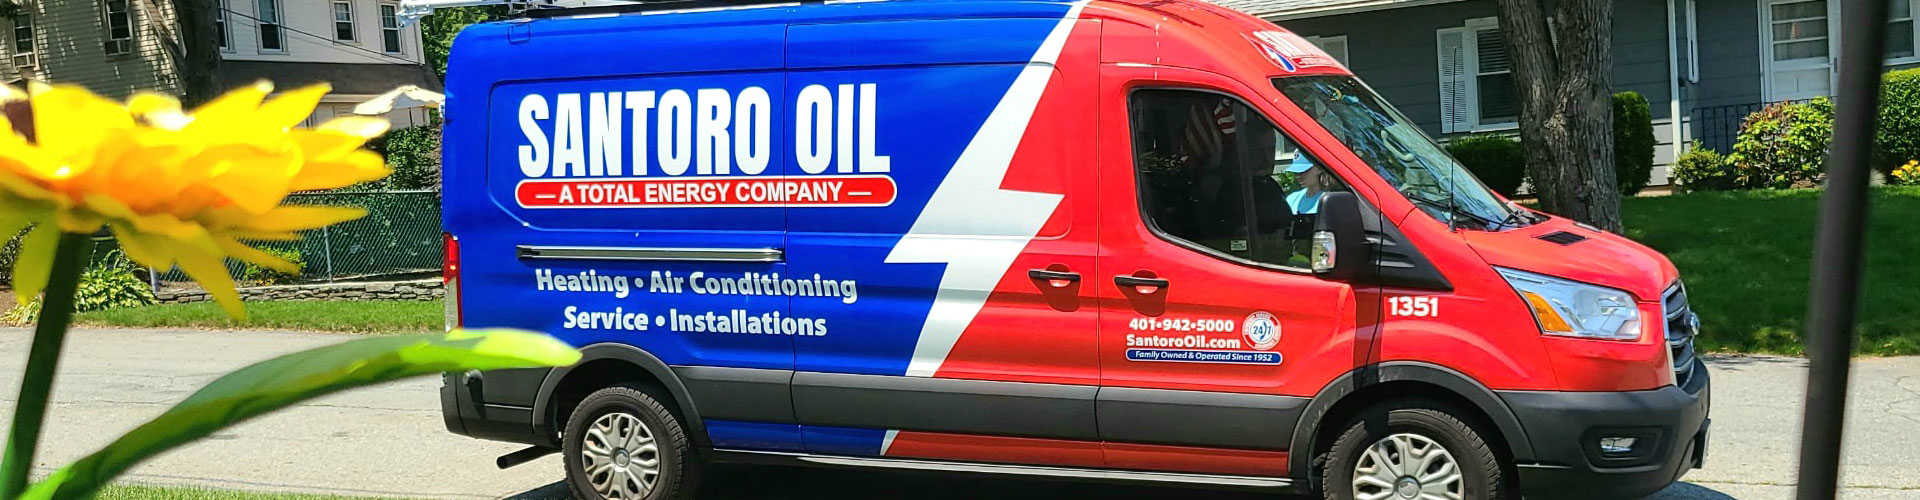 Santoro Oil service truck in front of a customer's home with a beautiful flower